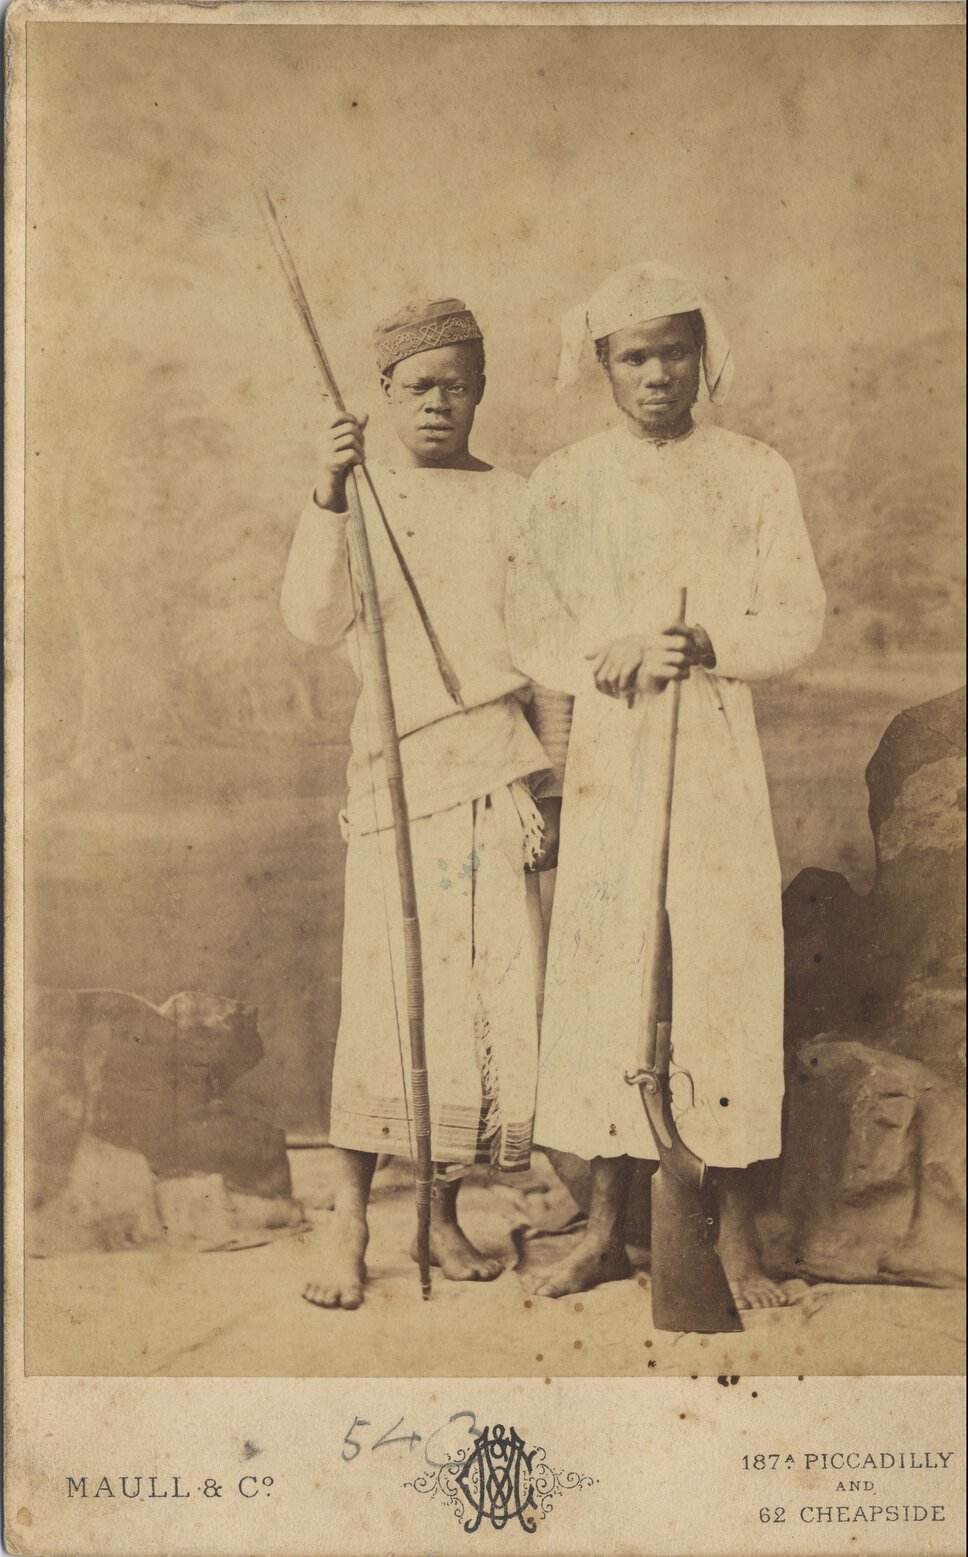 James Chuma and Abdulla Susi, in traditional clothing, with weapons, against a backdrop of rocks.